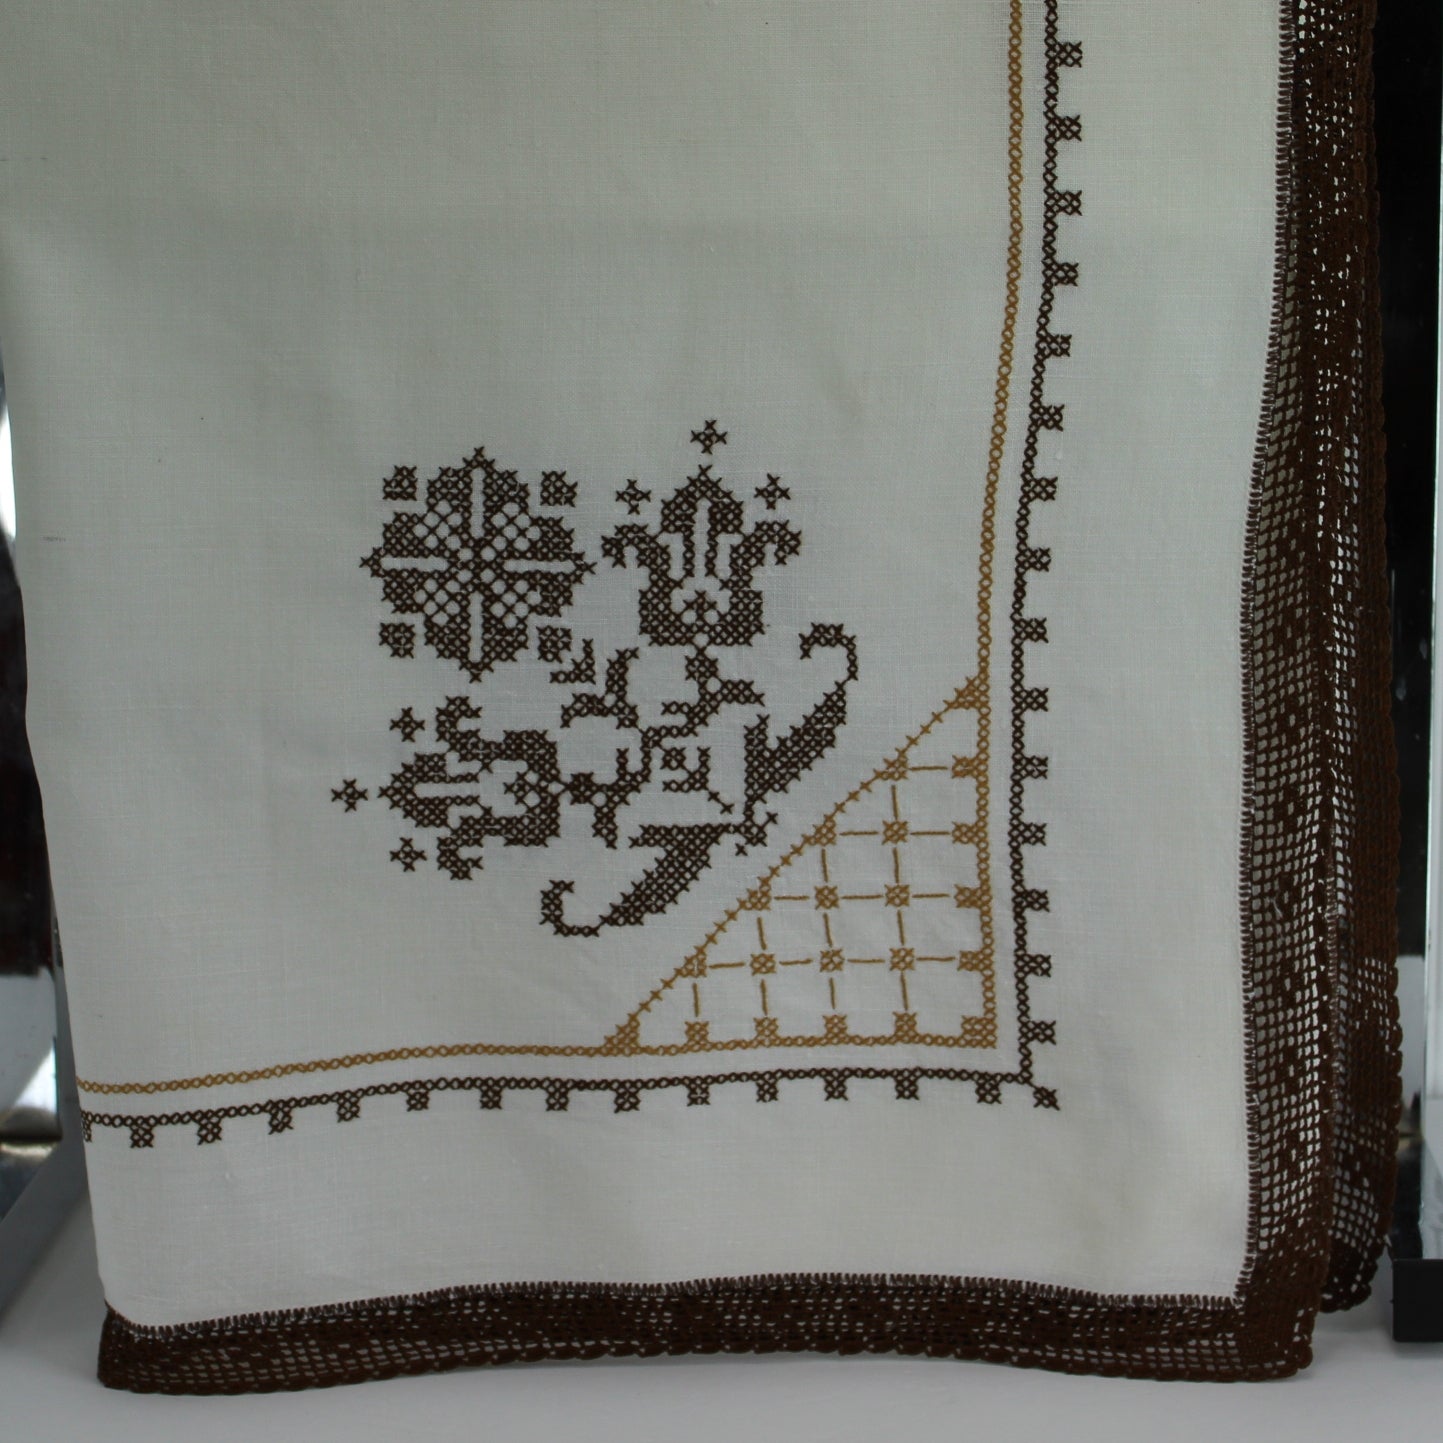 Brown Cross Stitch Embroidered Tablecloth Heavy White Linen Crochet Edges corner view of tablecloth